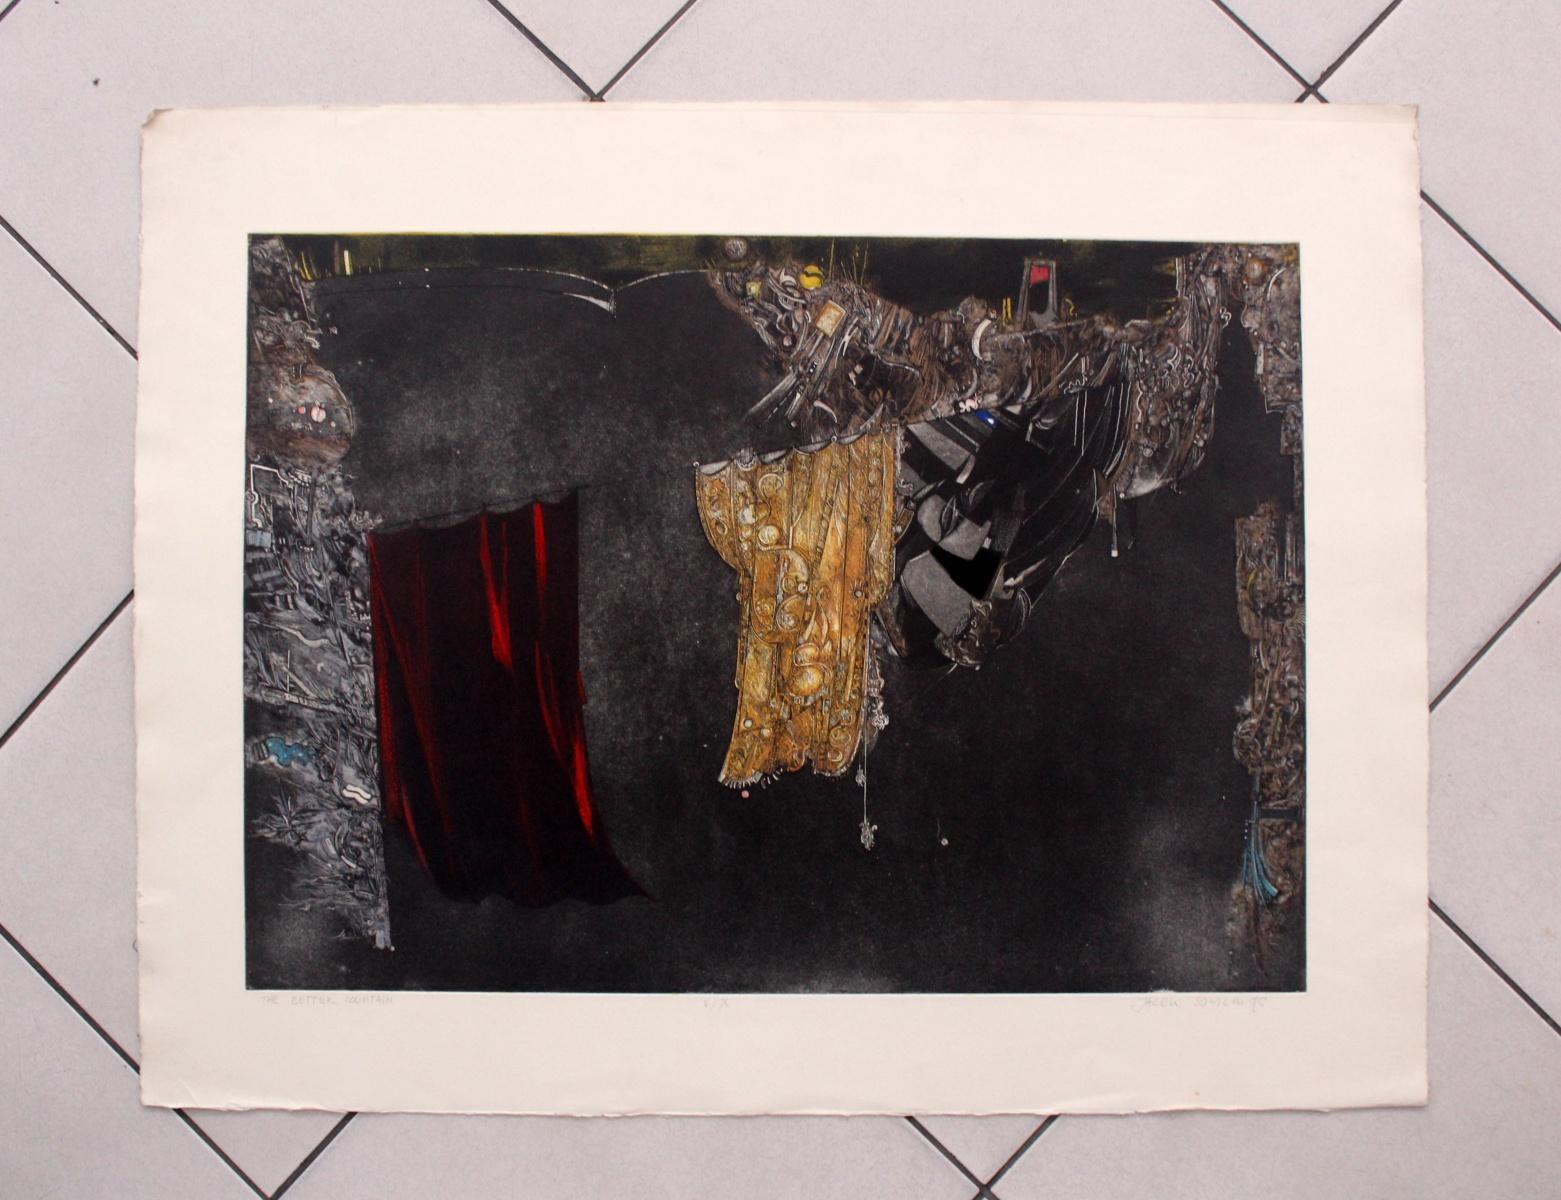 The better curtain - XX century, Mixed media print, Abstract, Black Red & Yellow - Print by Jacek Sowicki